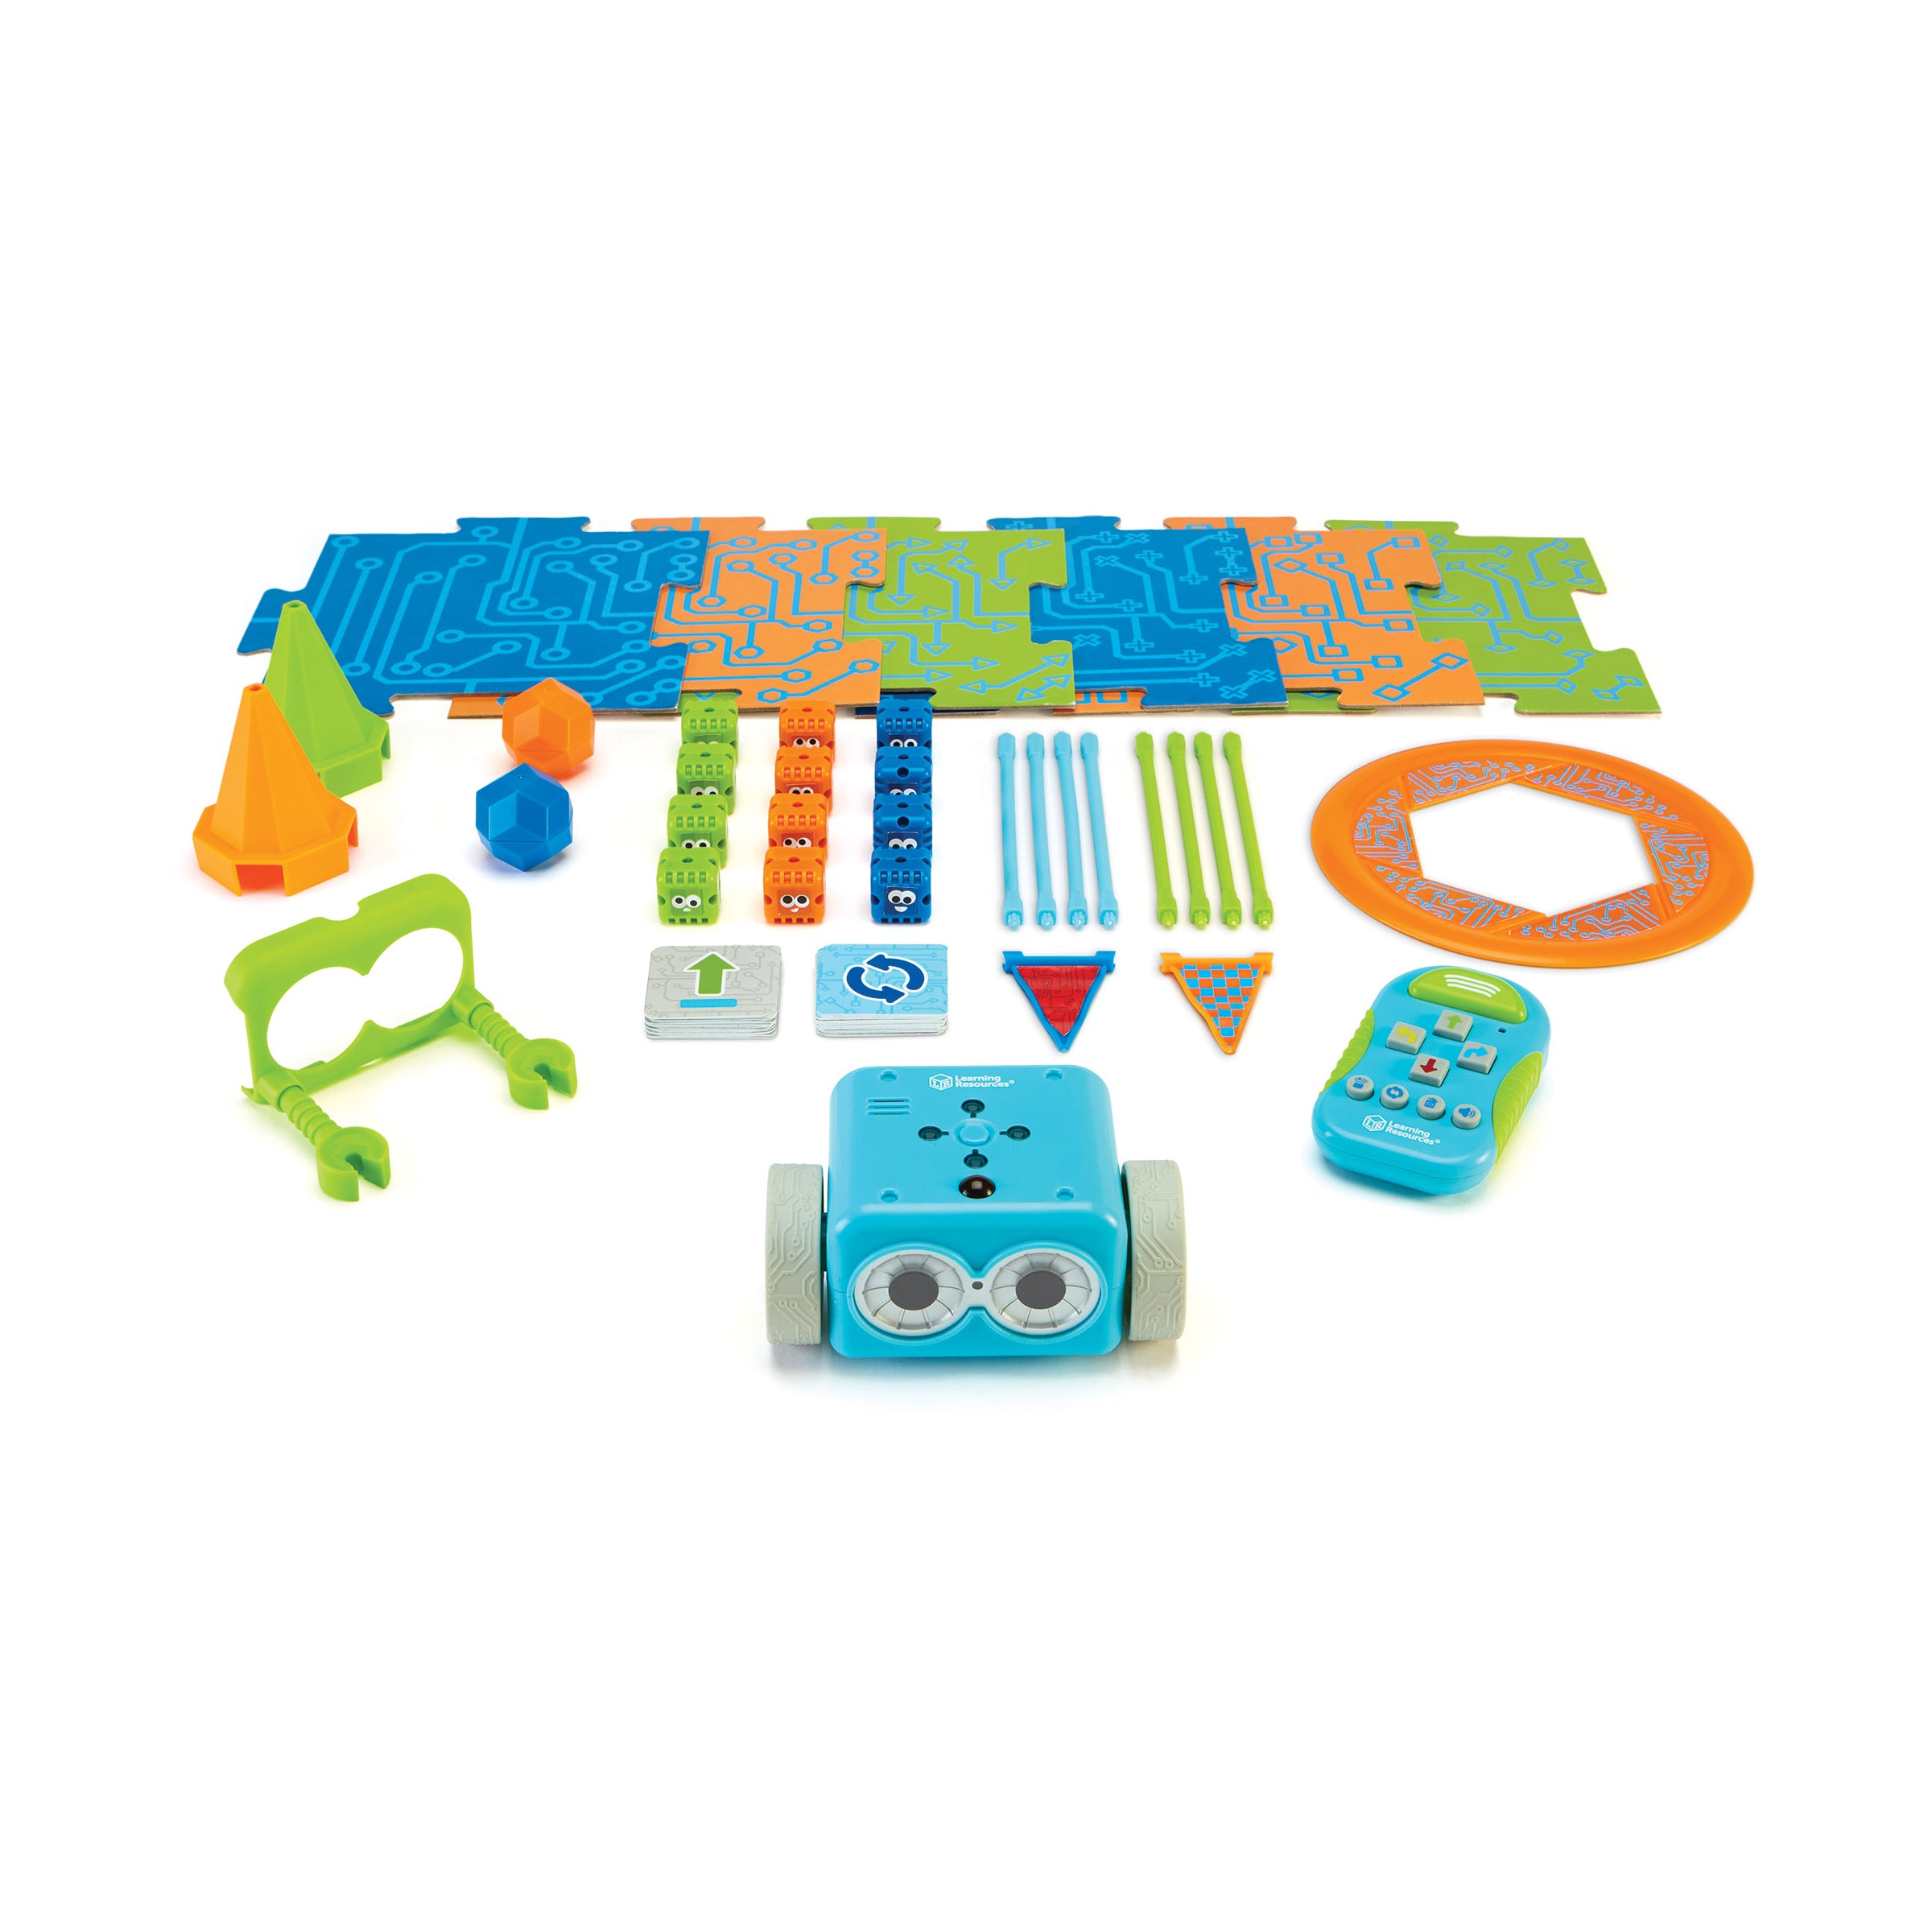 Learning Resources - Botley The Coding Robot Activity Set